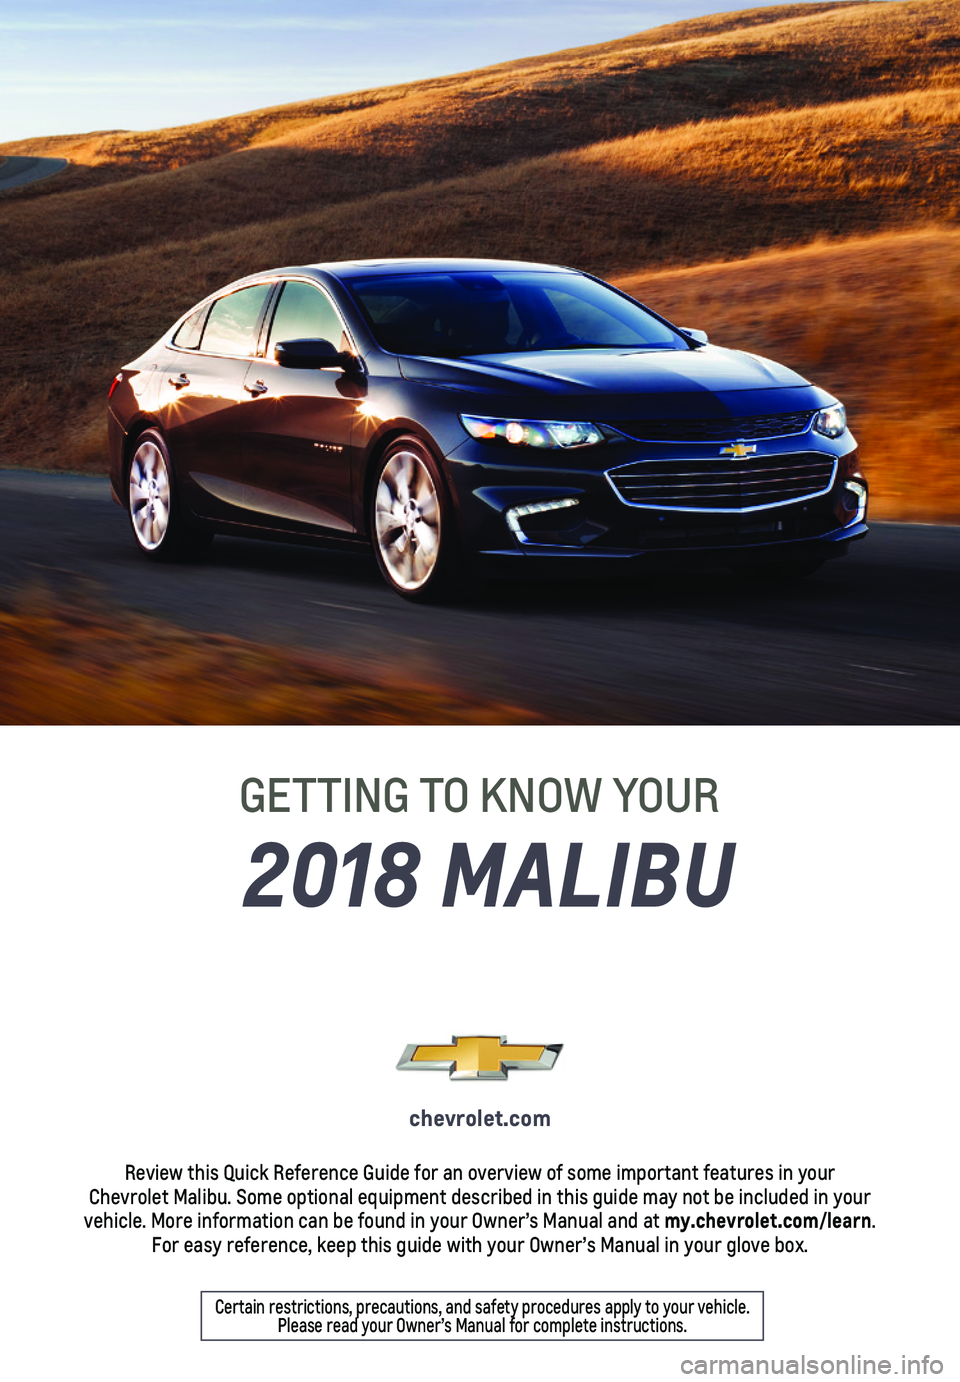 CHEVROLET MALIBU 2018  Get To Know Guide 1
2018 MALIBU
GETTING TO KNOW YOUR
chevrolet.com
Review this Quick Reference Guide for an overview of some important feat\
ures in your  Chevrolet Malibu. Some optional equipment described in this gui